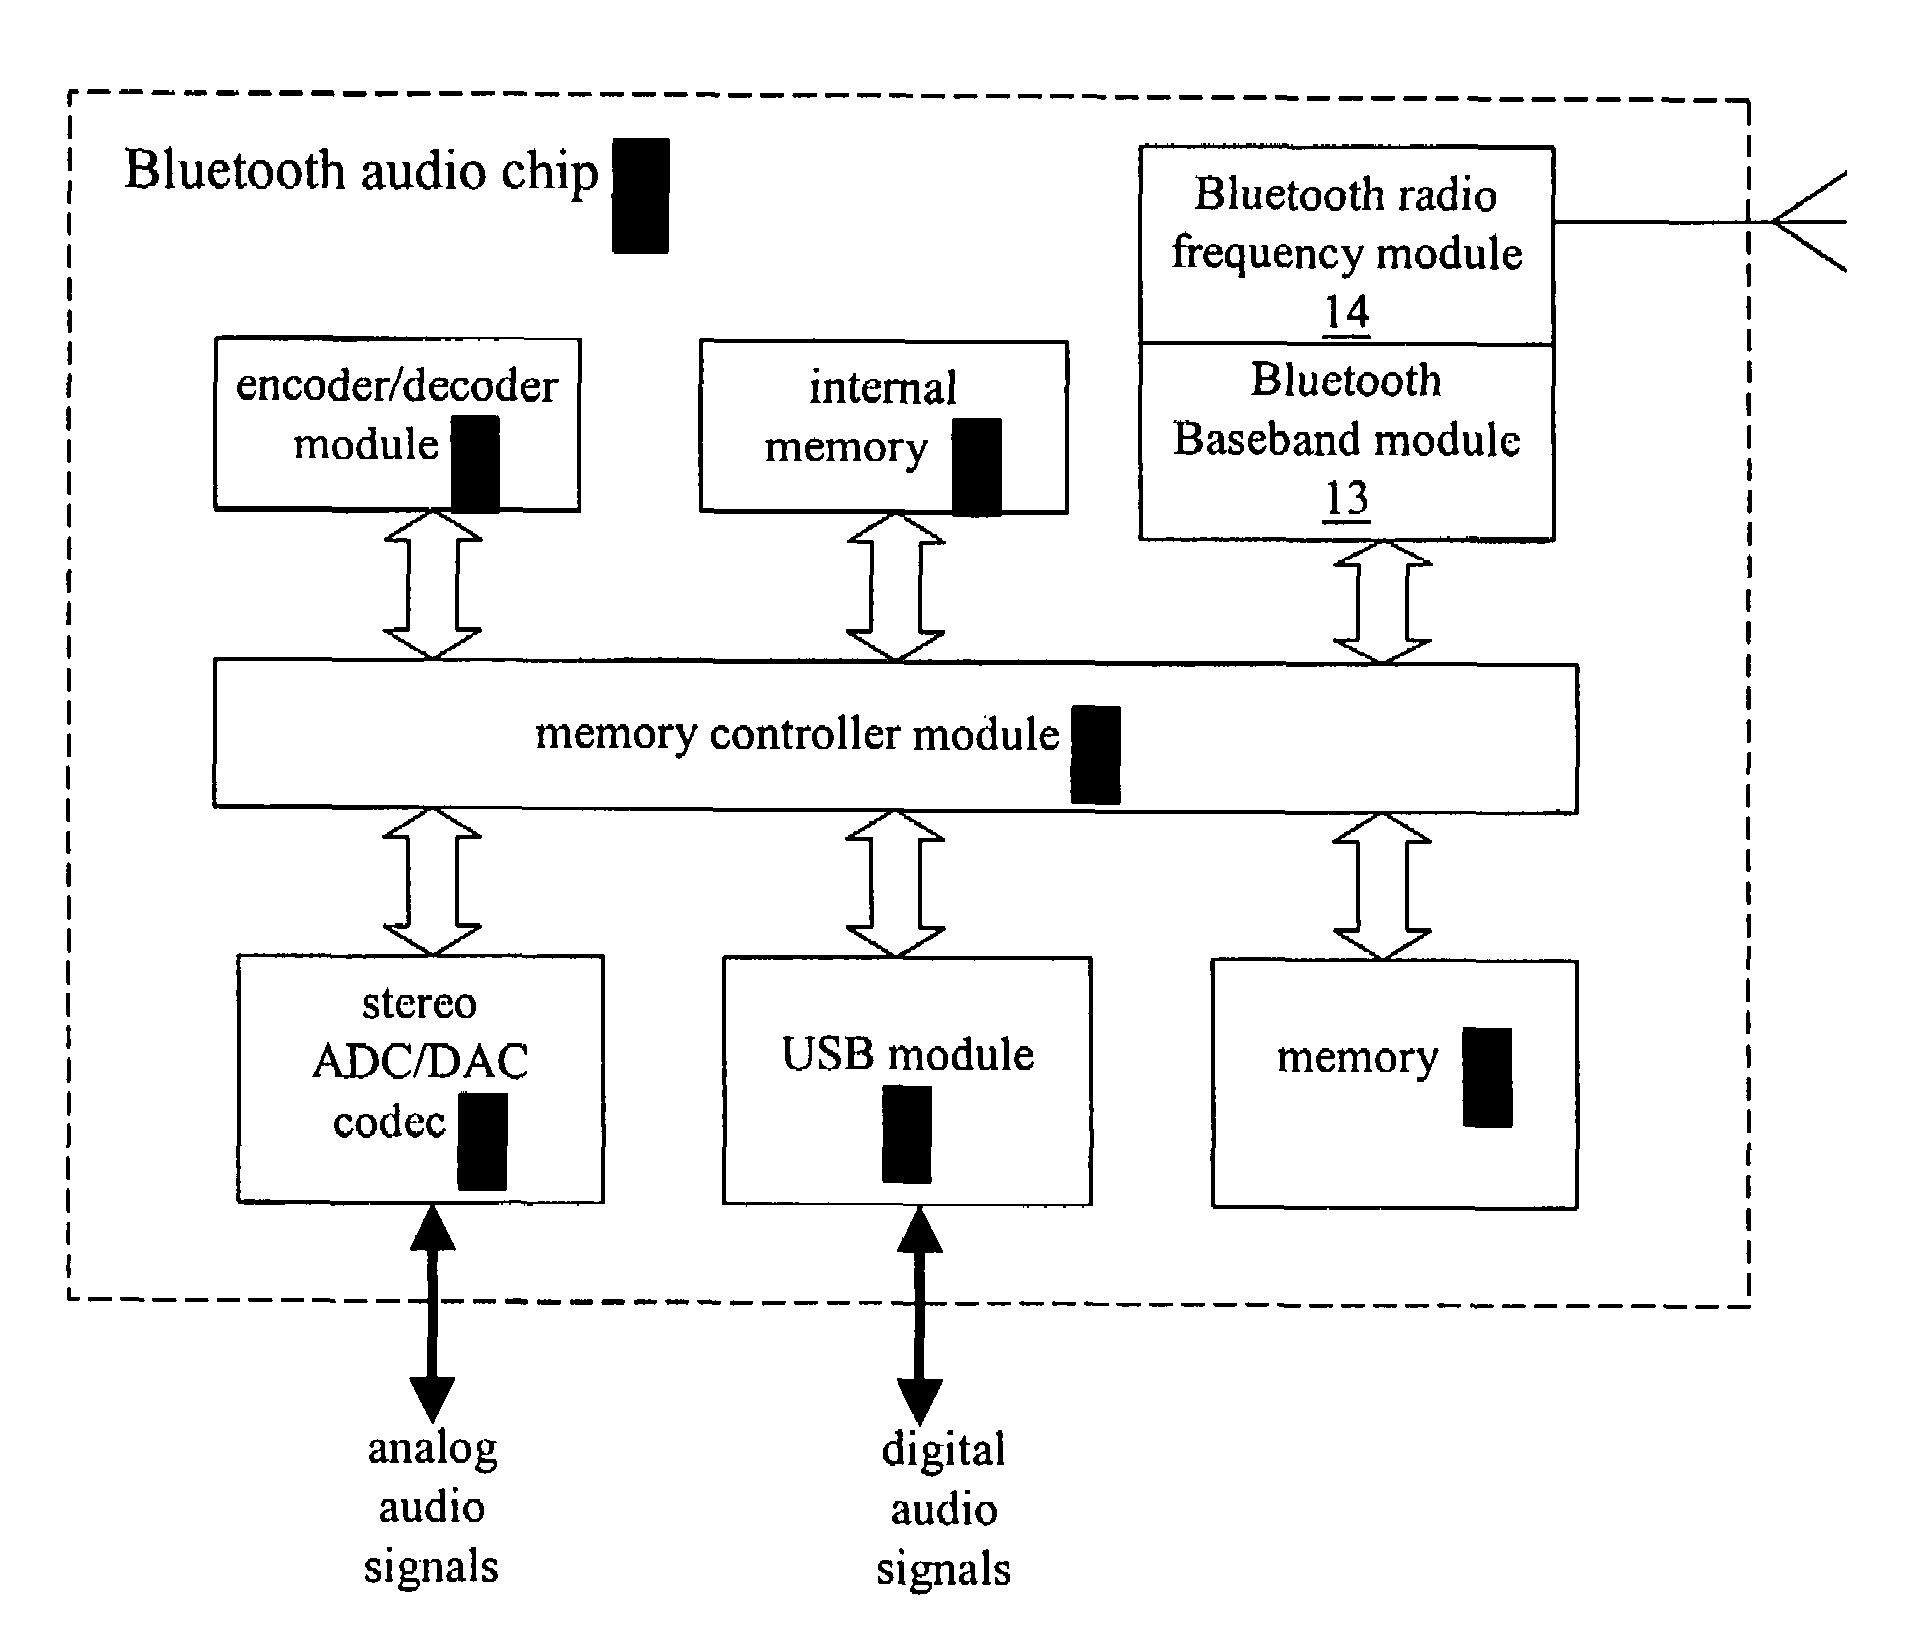 Bluetooth audio chip with multiple input/output sources